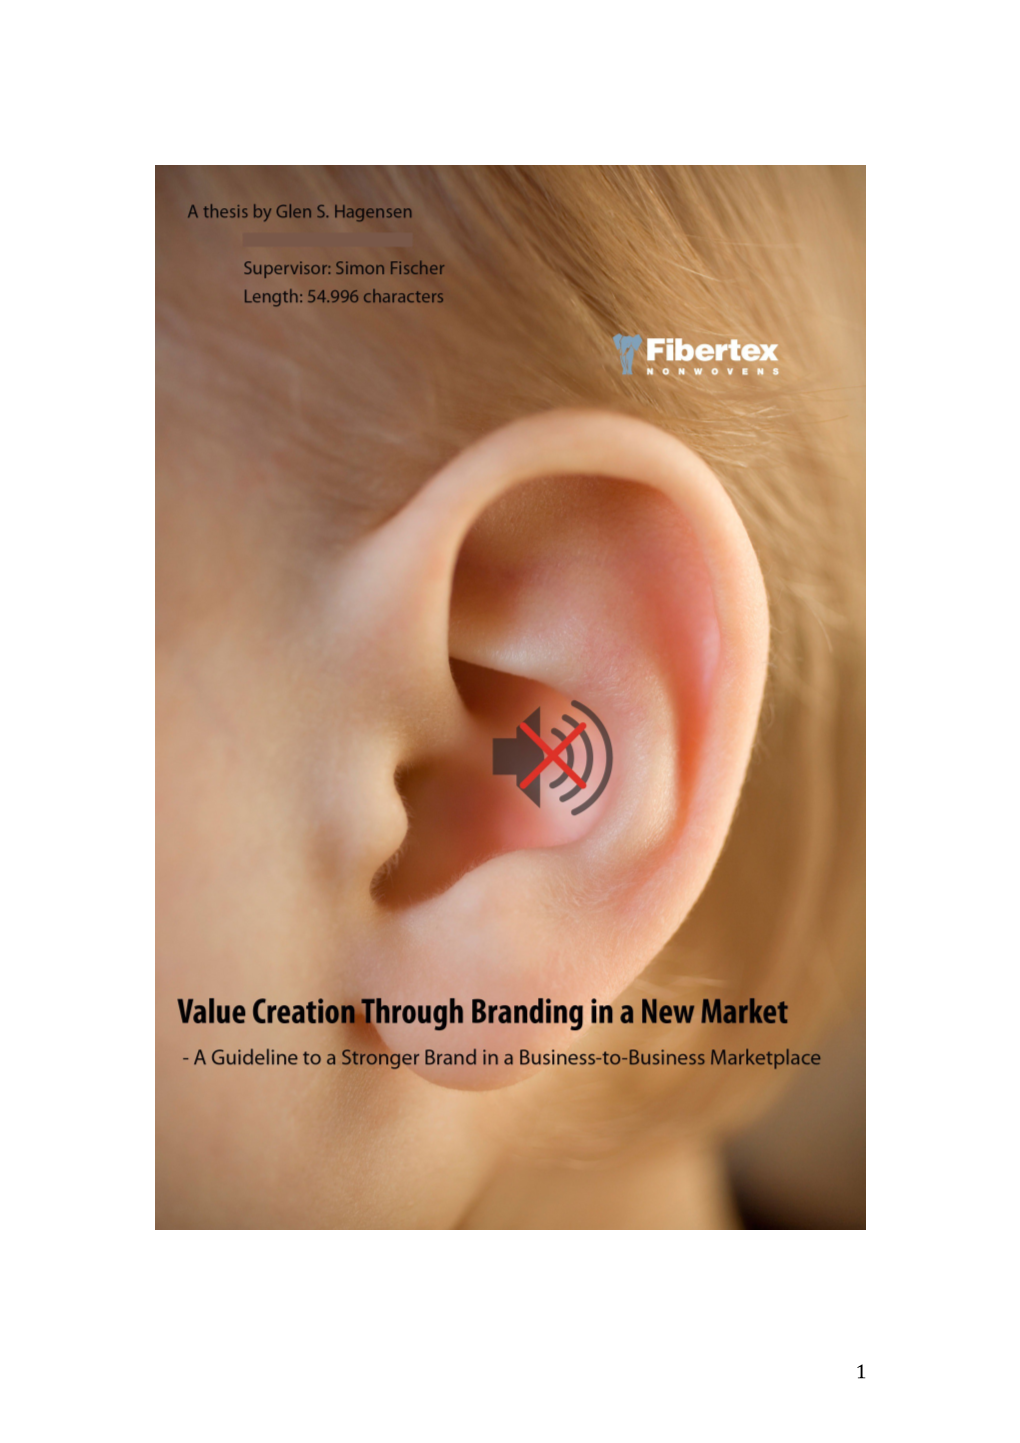 The Purpose of This Paper Is to Create a Guideline to How Fiberacoustic Can Brand Themselves